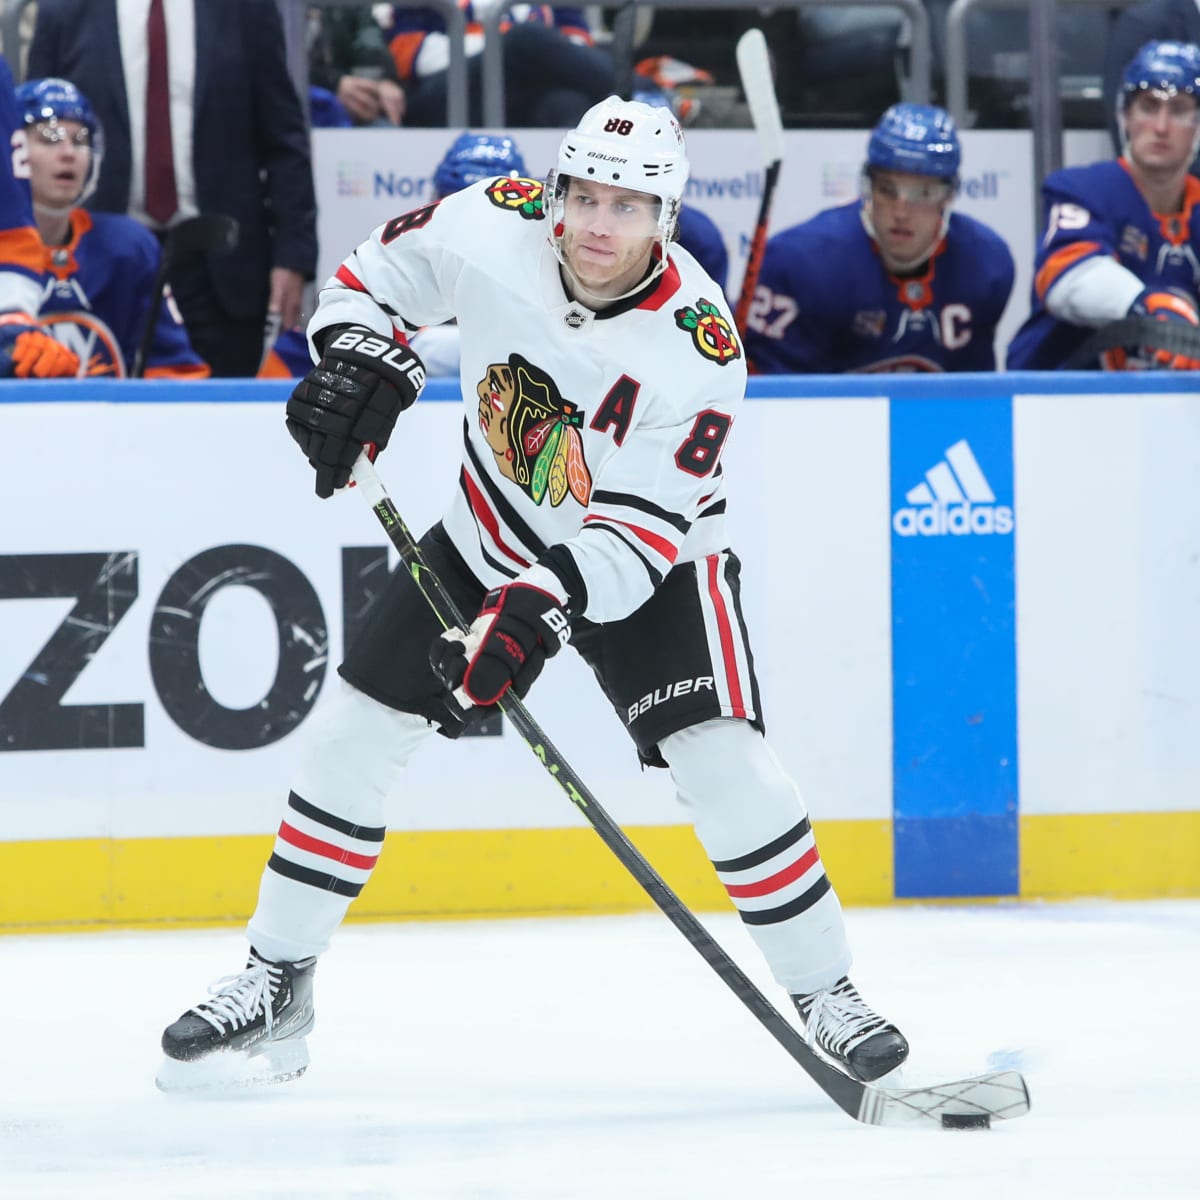 PATRICK KANE REUNION IN THE WORKS WITH PANARIN IN NYC 👀👀 #nyrangers